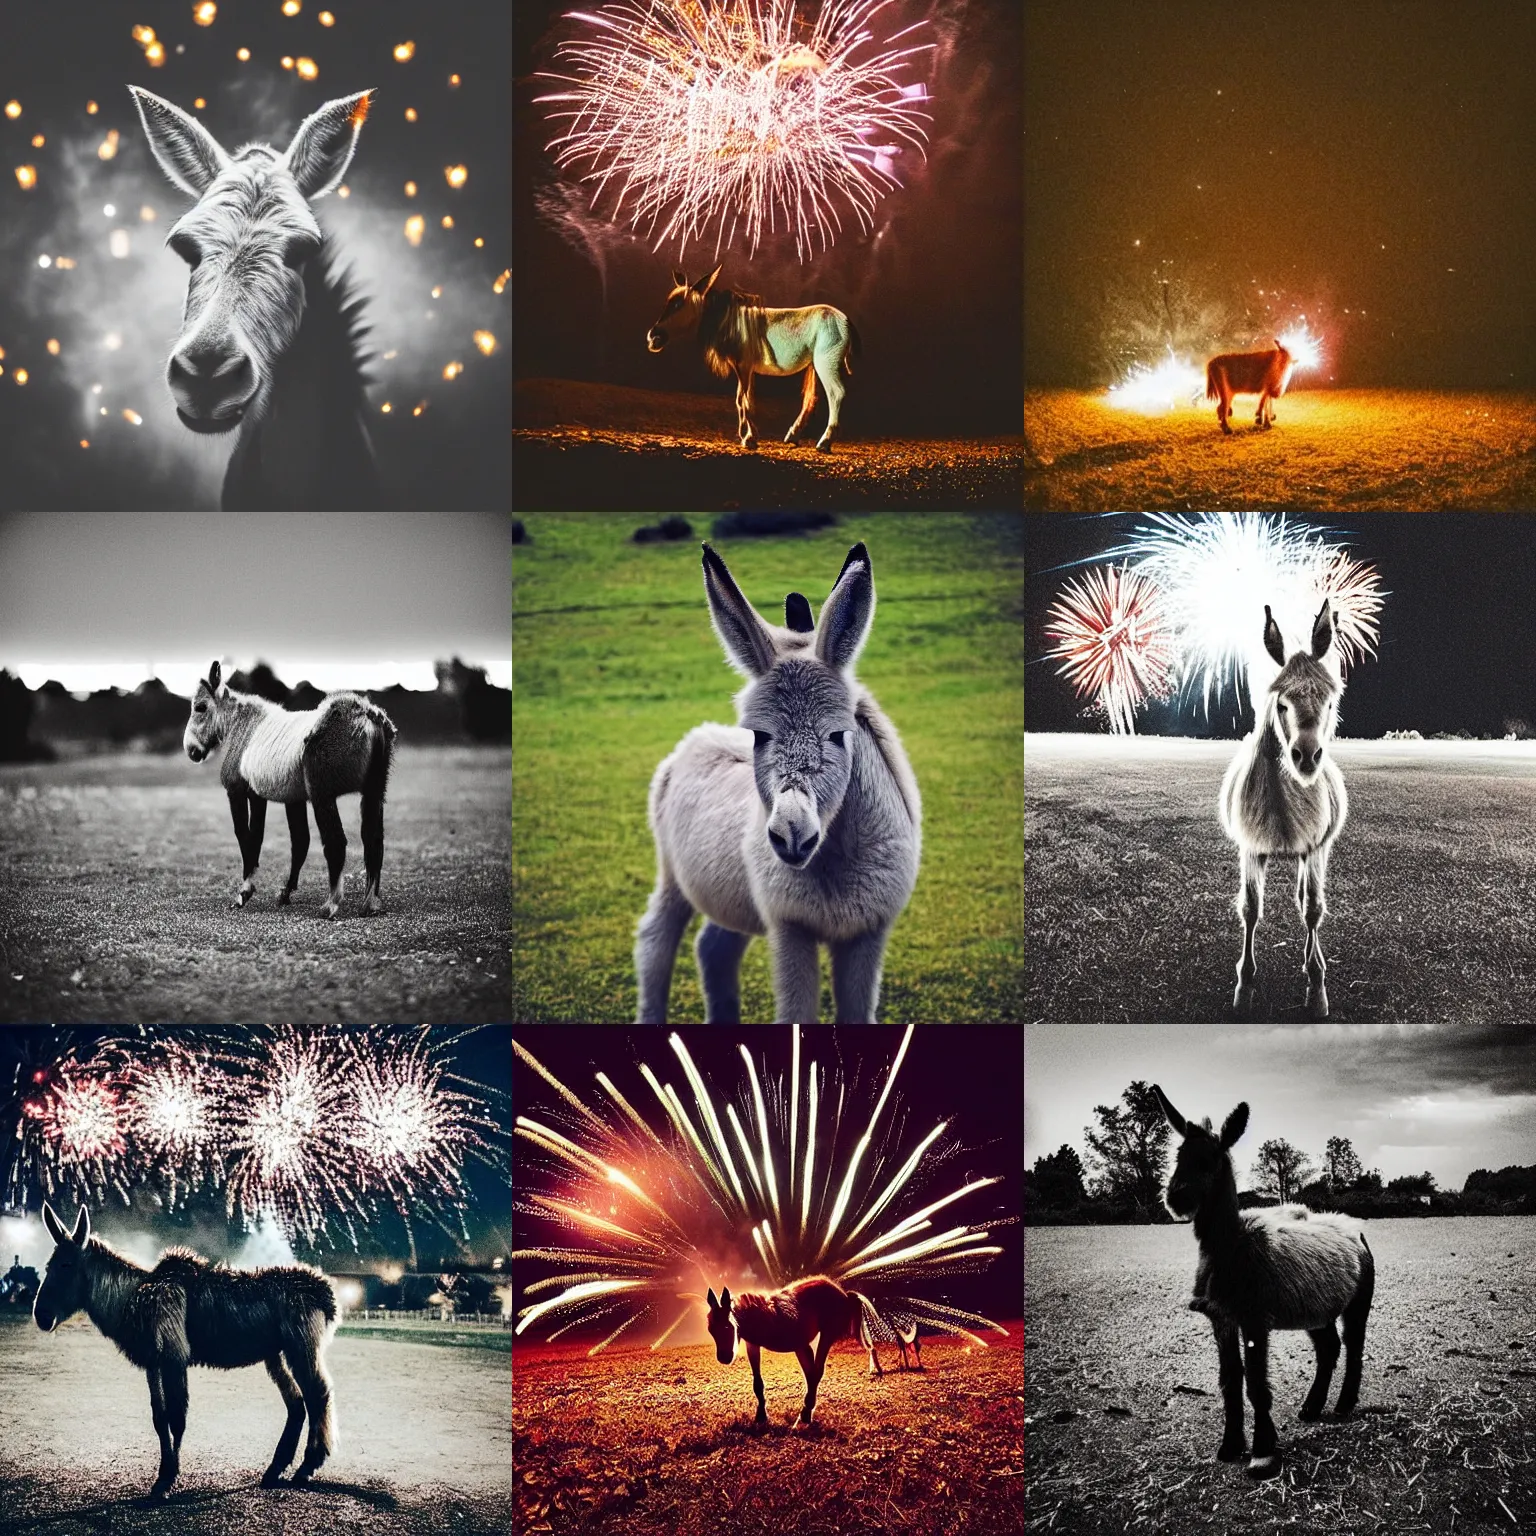 Prompt: “exploding fireworks fireworks in the night night night sky raining down embers and sparks and brightly burning pieces falling from the sky, a pale donkey stands in a field in the darkness. Photography. Flash photo. Cursed image.”